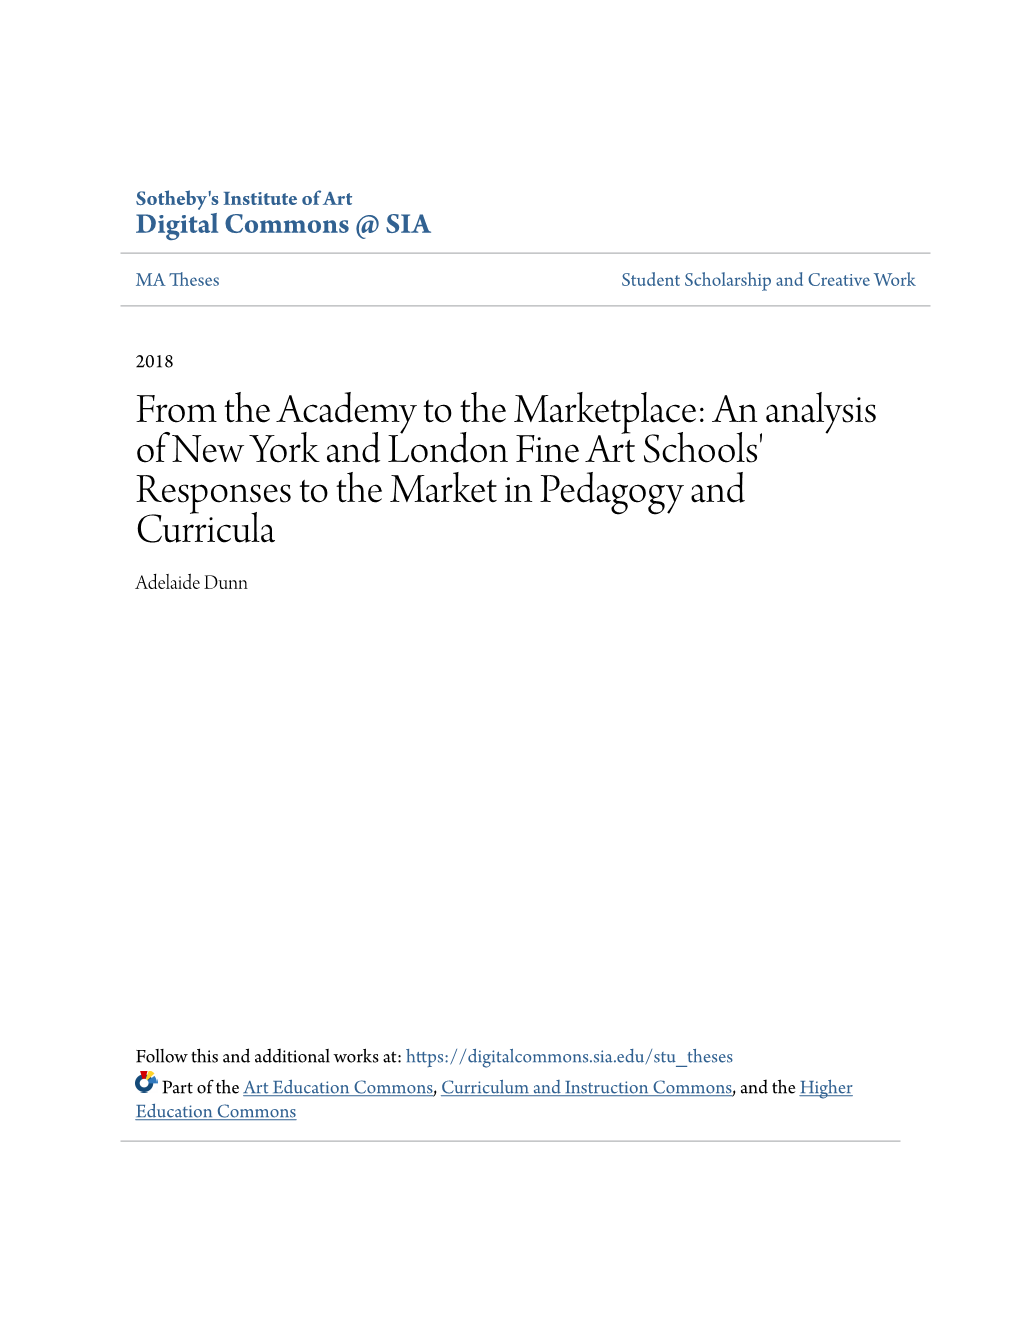 An Analysis of New York and London Fine Art Schools' Responses to the Market in Pedagogy and Curricula Adelaide Dunn